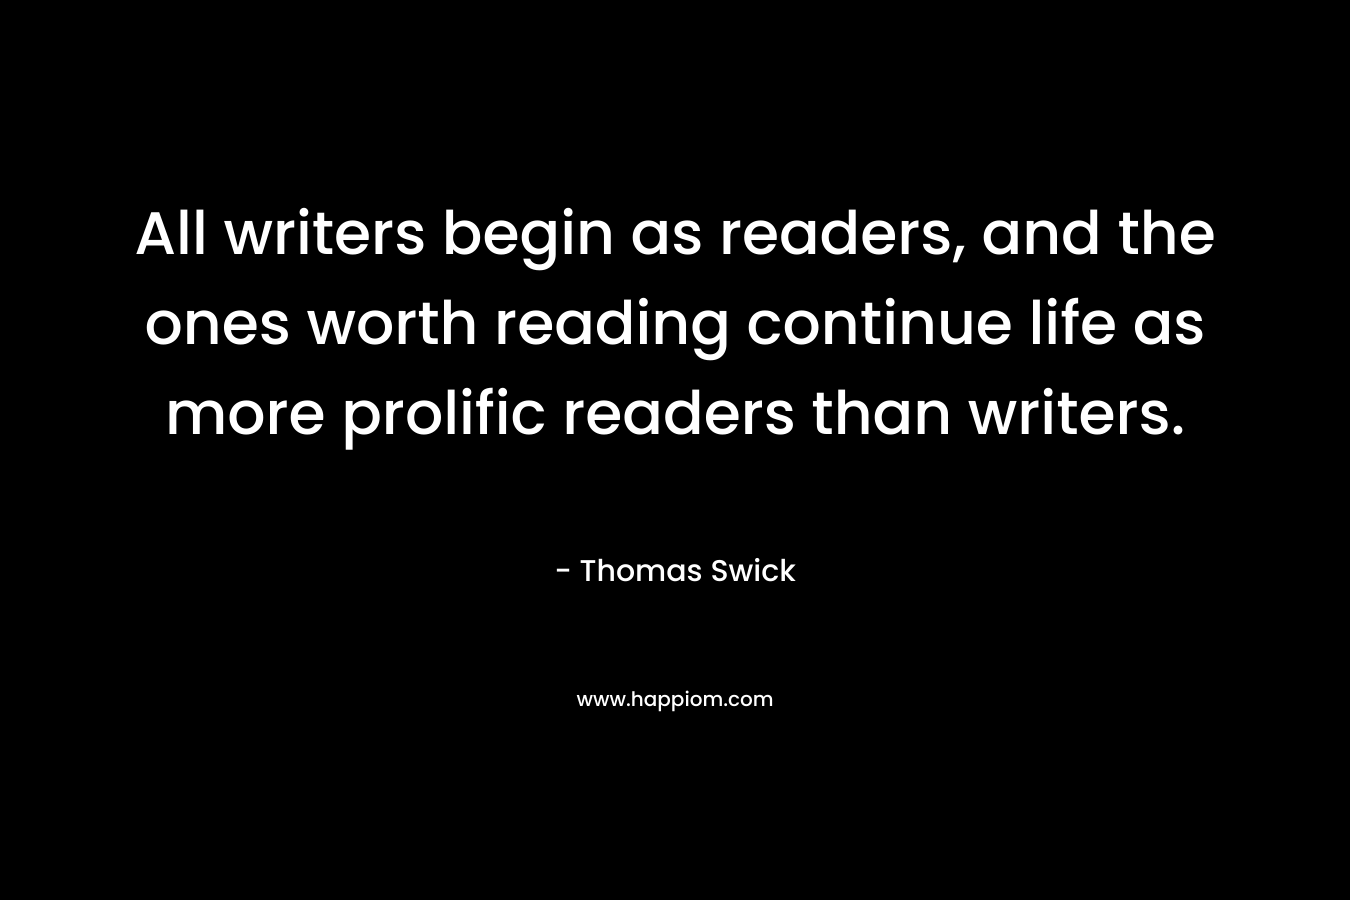 All writers begin as readers, and the ones worth reading continue life as more prolific readers than writers. – Thomas Swick